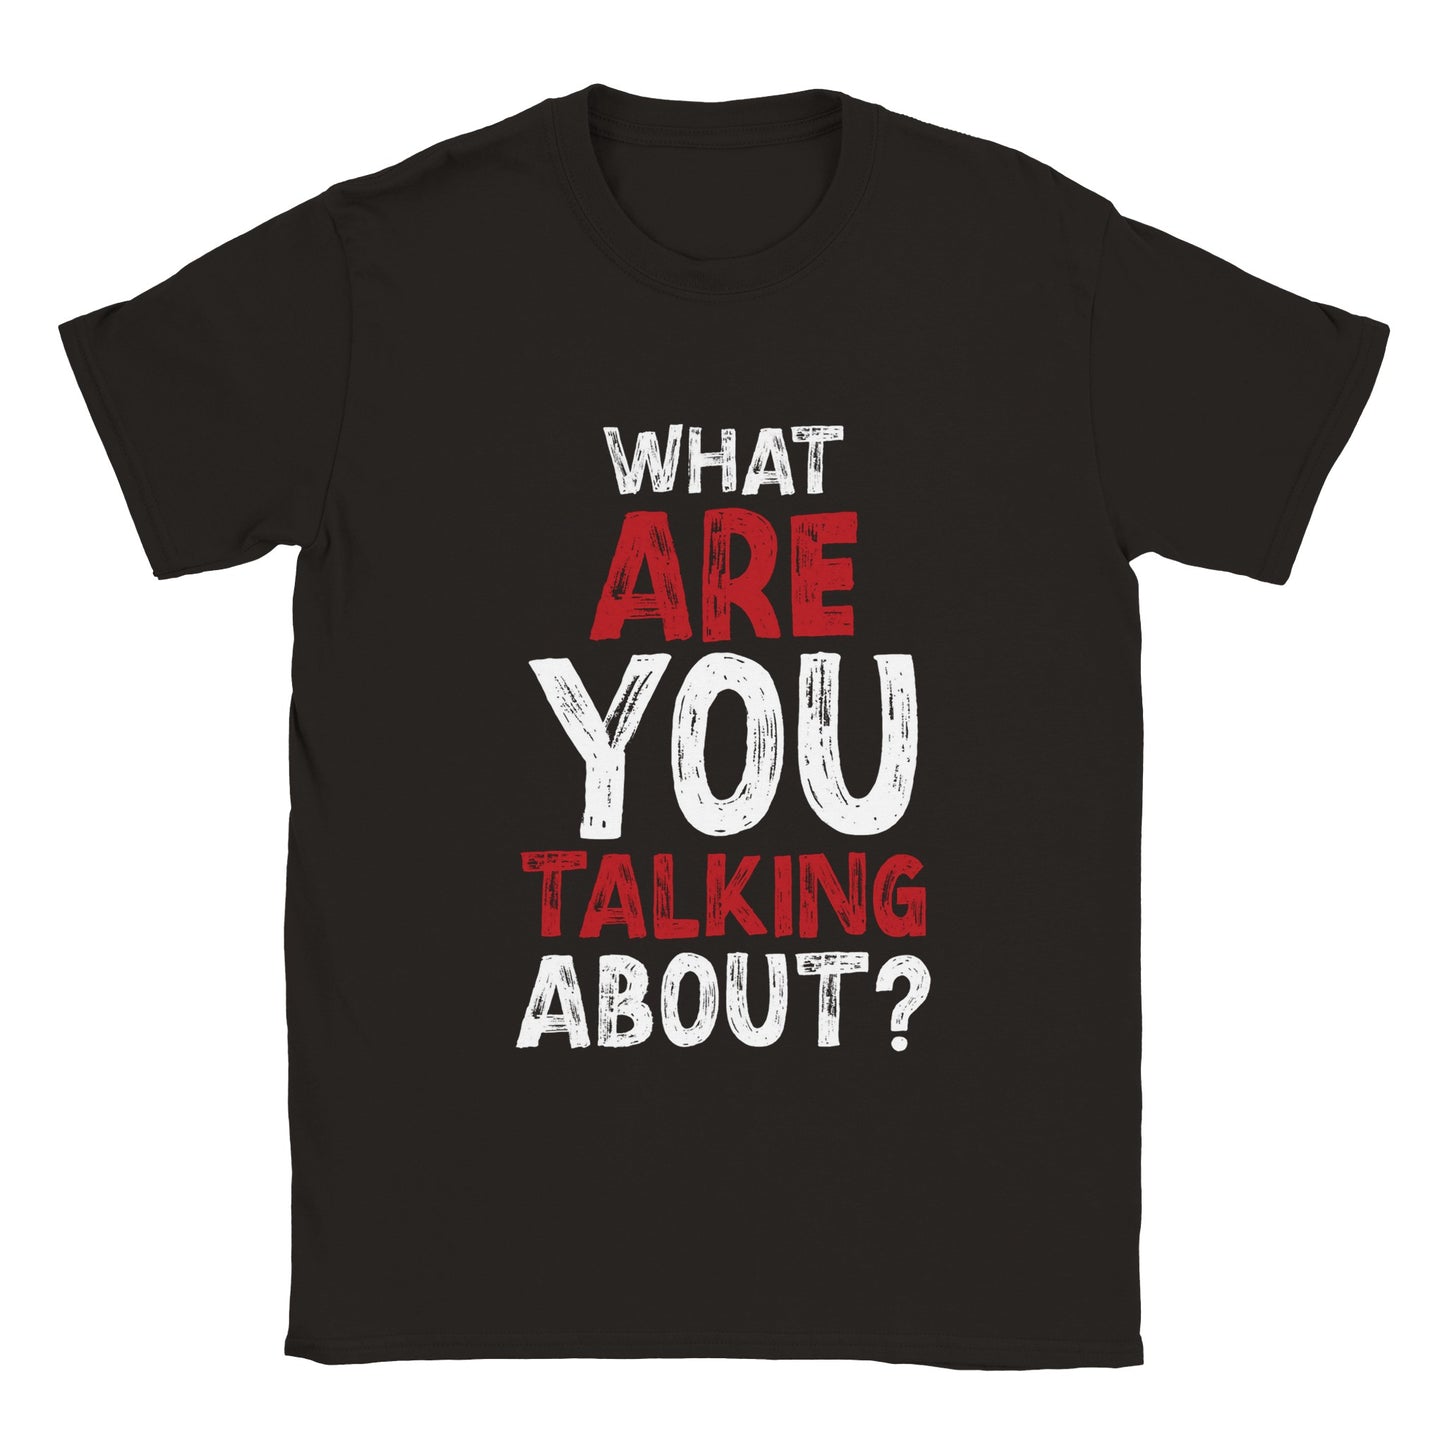 Unisex "What Are You Talking About?" Tee